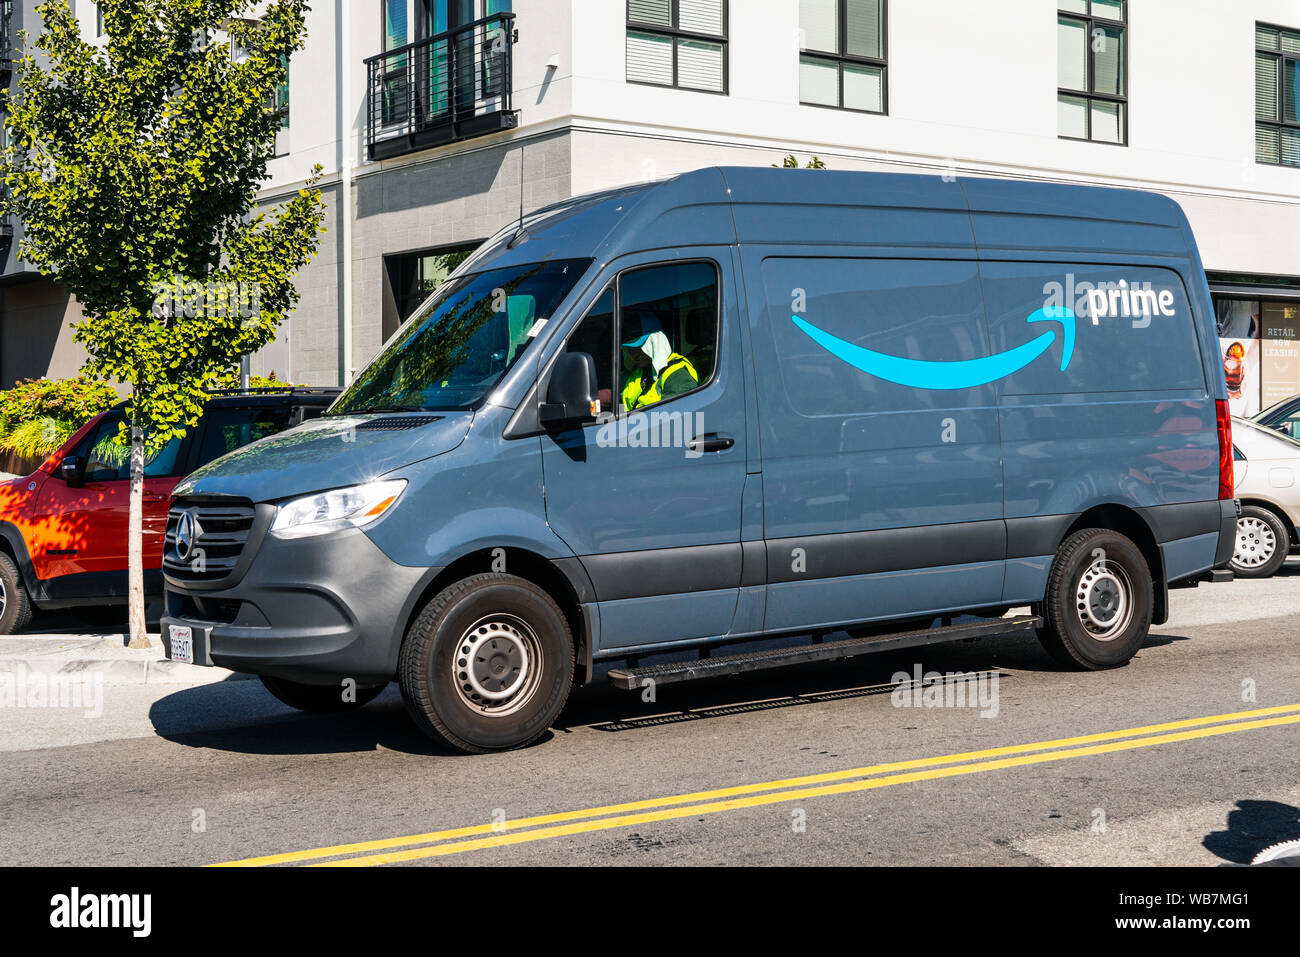 Amazon Delivery Van High Resolution Stock Photography And Images Alamy